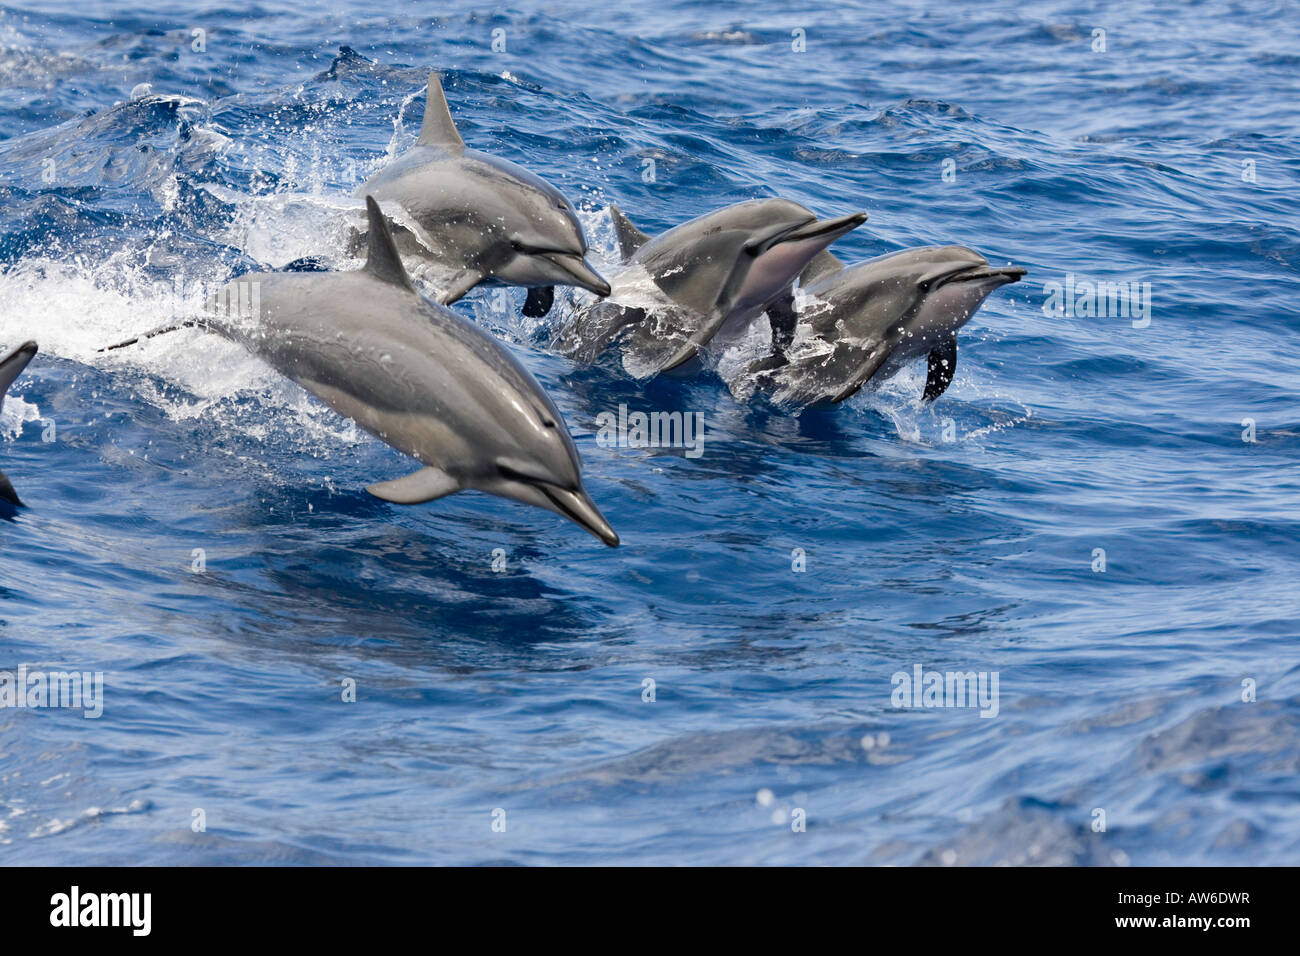 Four spinner dolphin, Stenella longirostris, leap into the air at the same time, Hawaii. Stock Photo